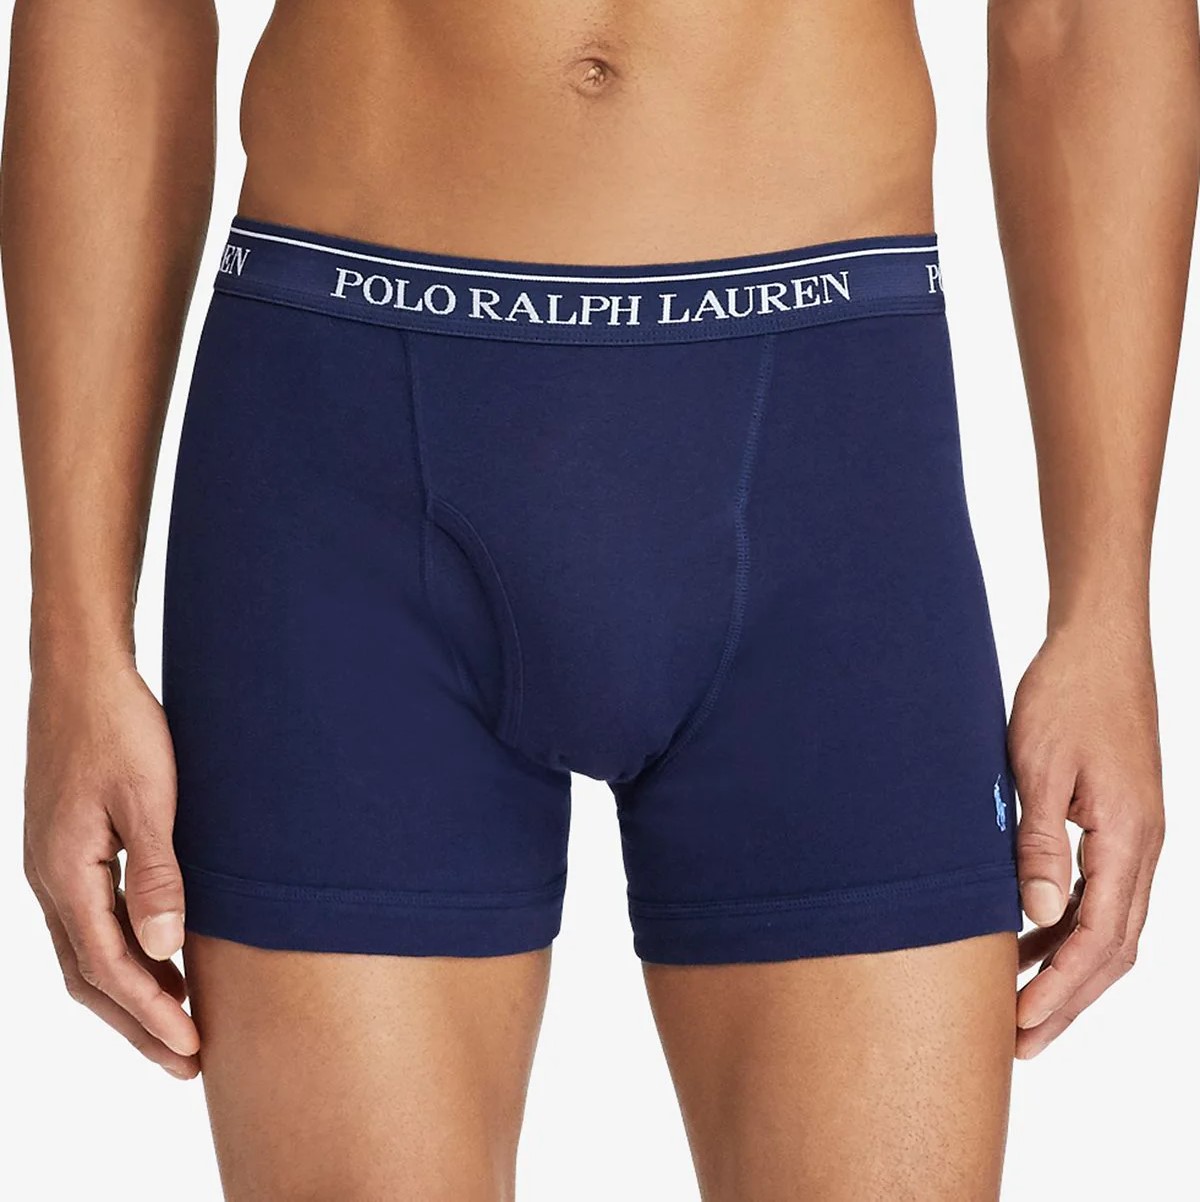 13 Amazing Polo Underwear For Men for 2023